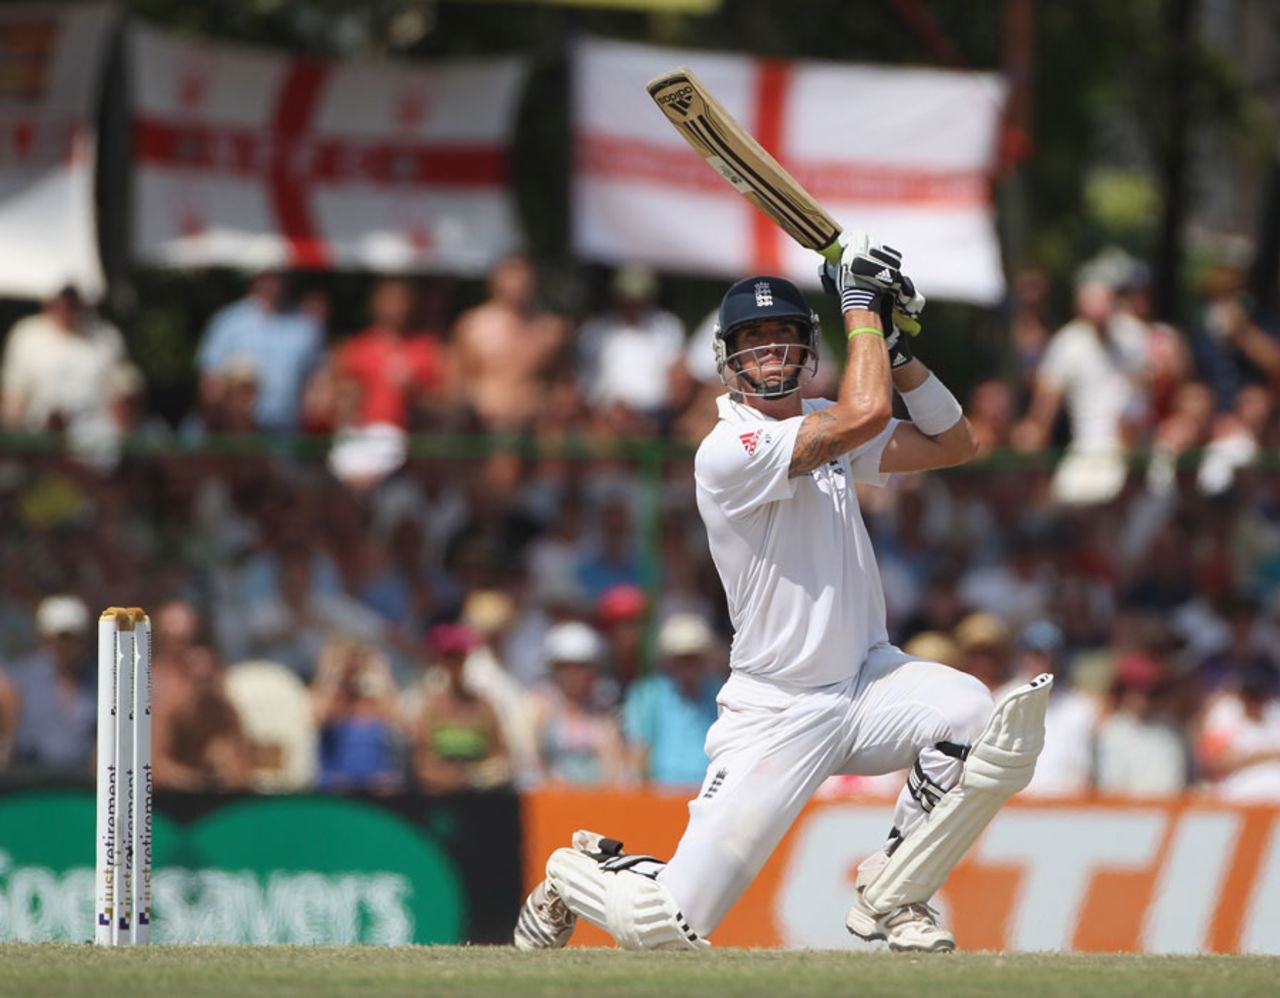 Kevin Pietersen drives during his innings of 151, Sri Lanka v England, 2nd Test, Colombo, P Sara Oval, 3rd day, April 5, 2012